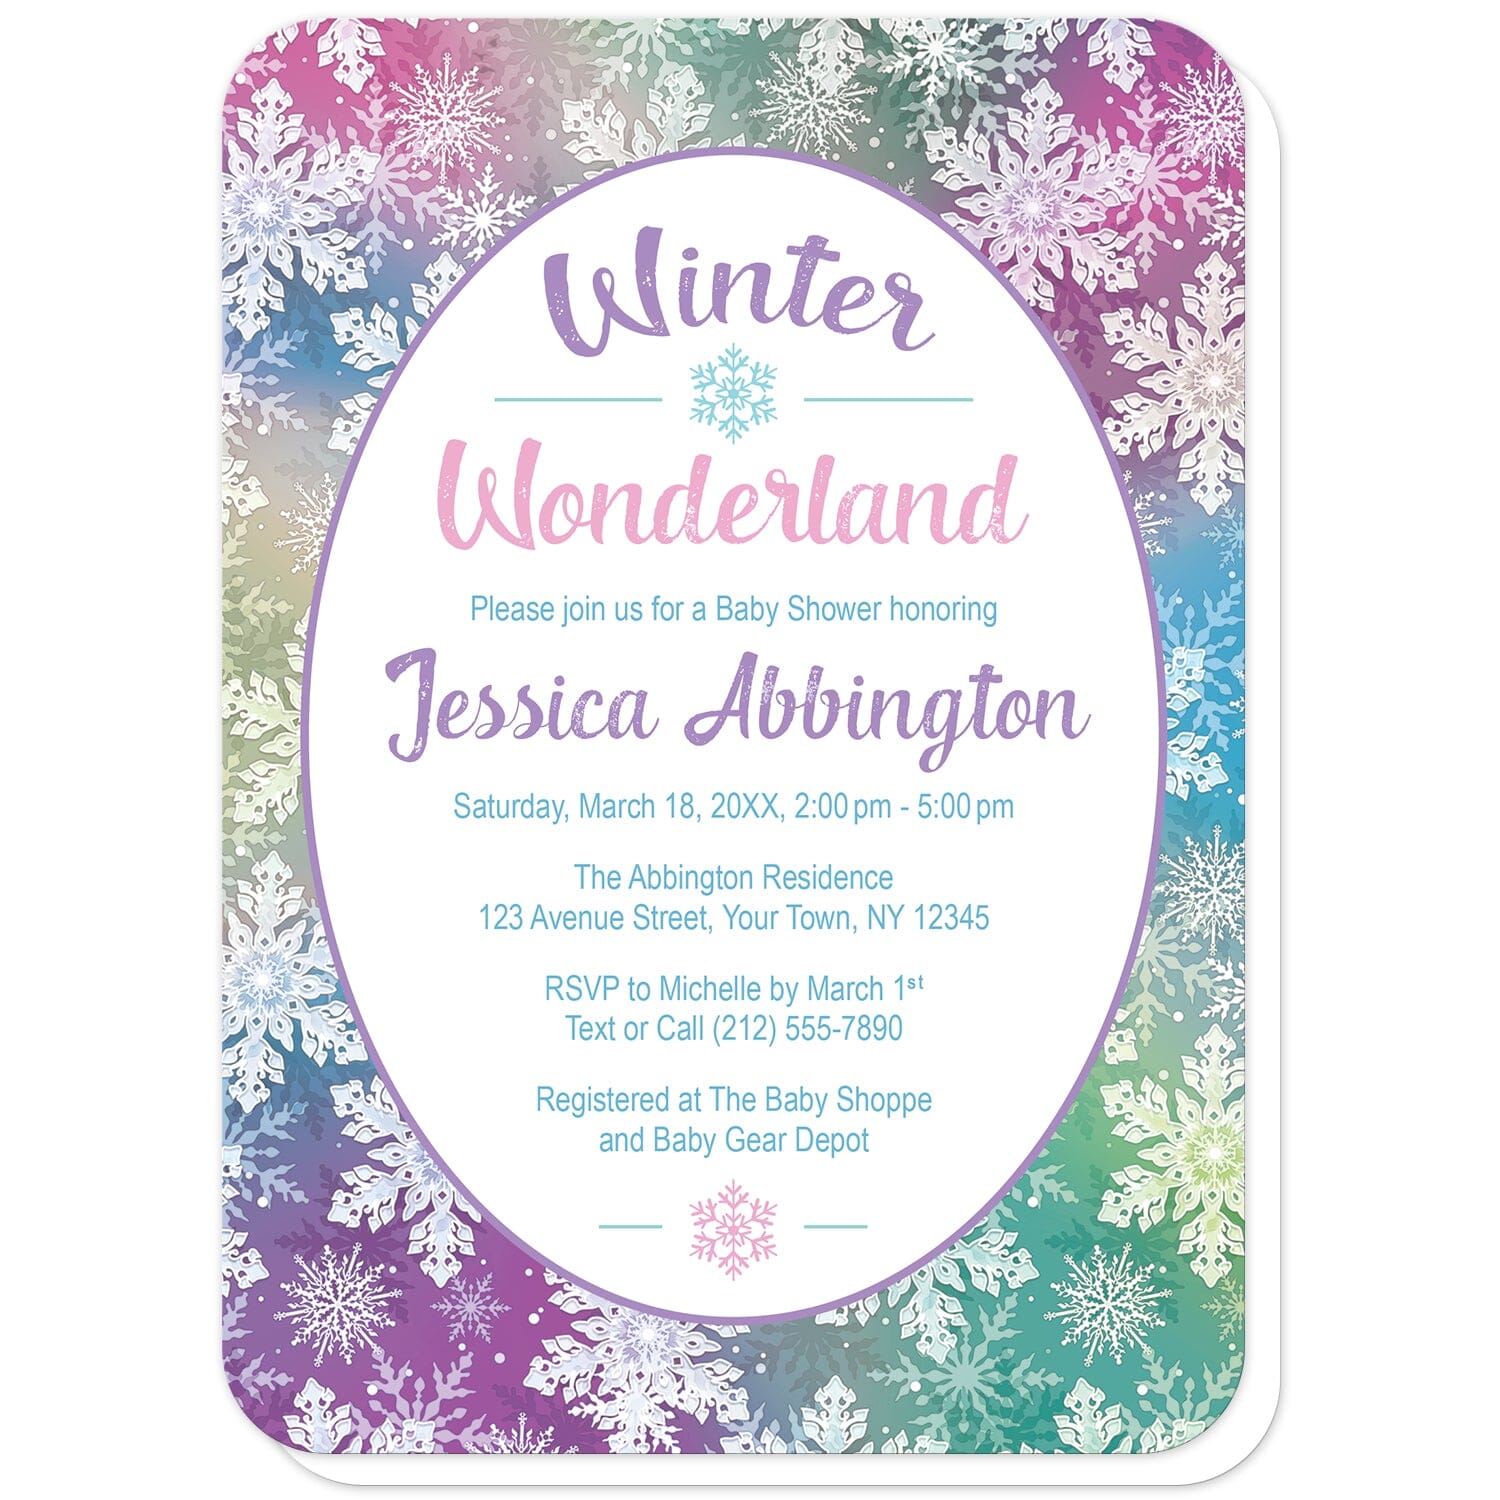 Rainbow Snowflake Winter Wonderland Baby Shower Invitations (with rounded corners) at Artistically Invited. Rainbow snowflake Winter Wonderland baby shower invitations designed with your personalized baby shower details custom printed in colorful text in a white oval frame design over a beautiful and ornate rainbow snowflake pattern with white snowflakes over a multicolored background.